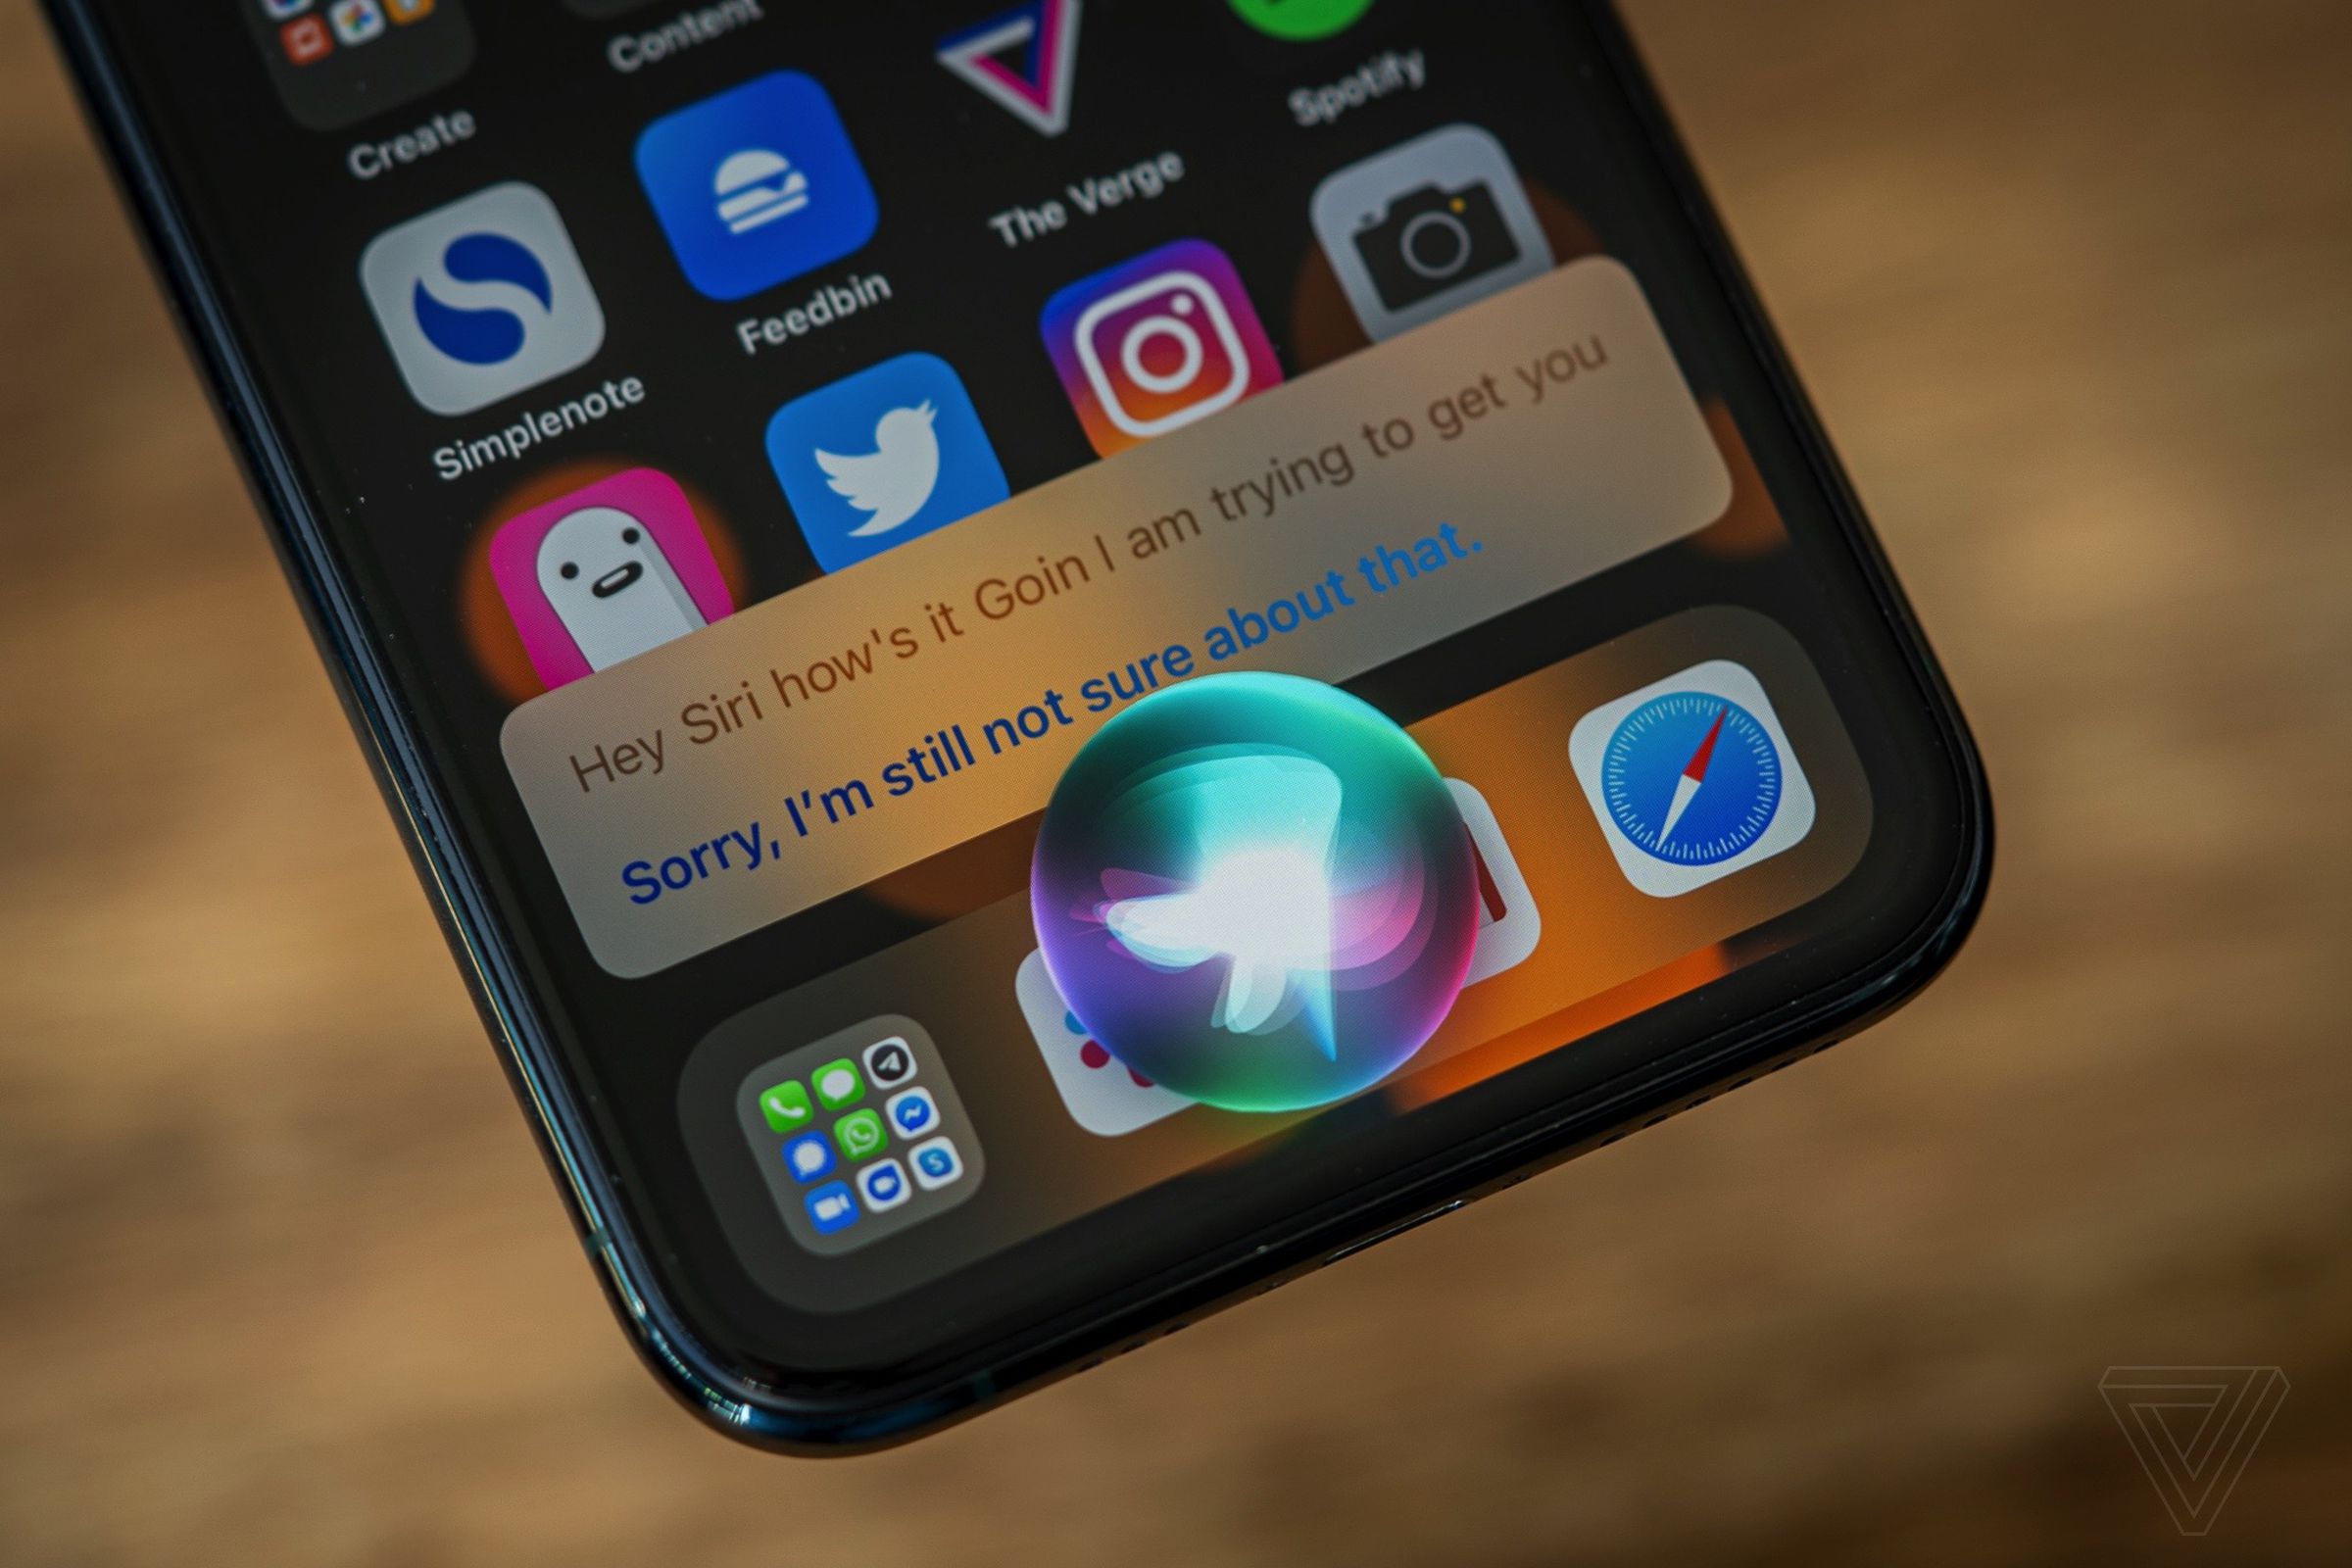 The new look for Siri in Compact UI